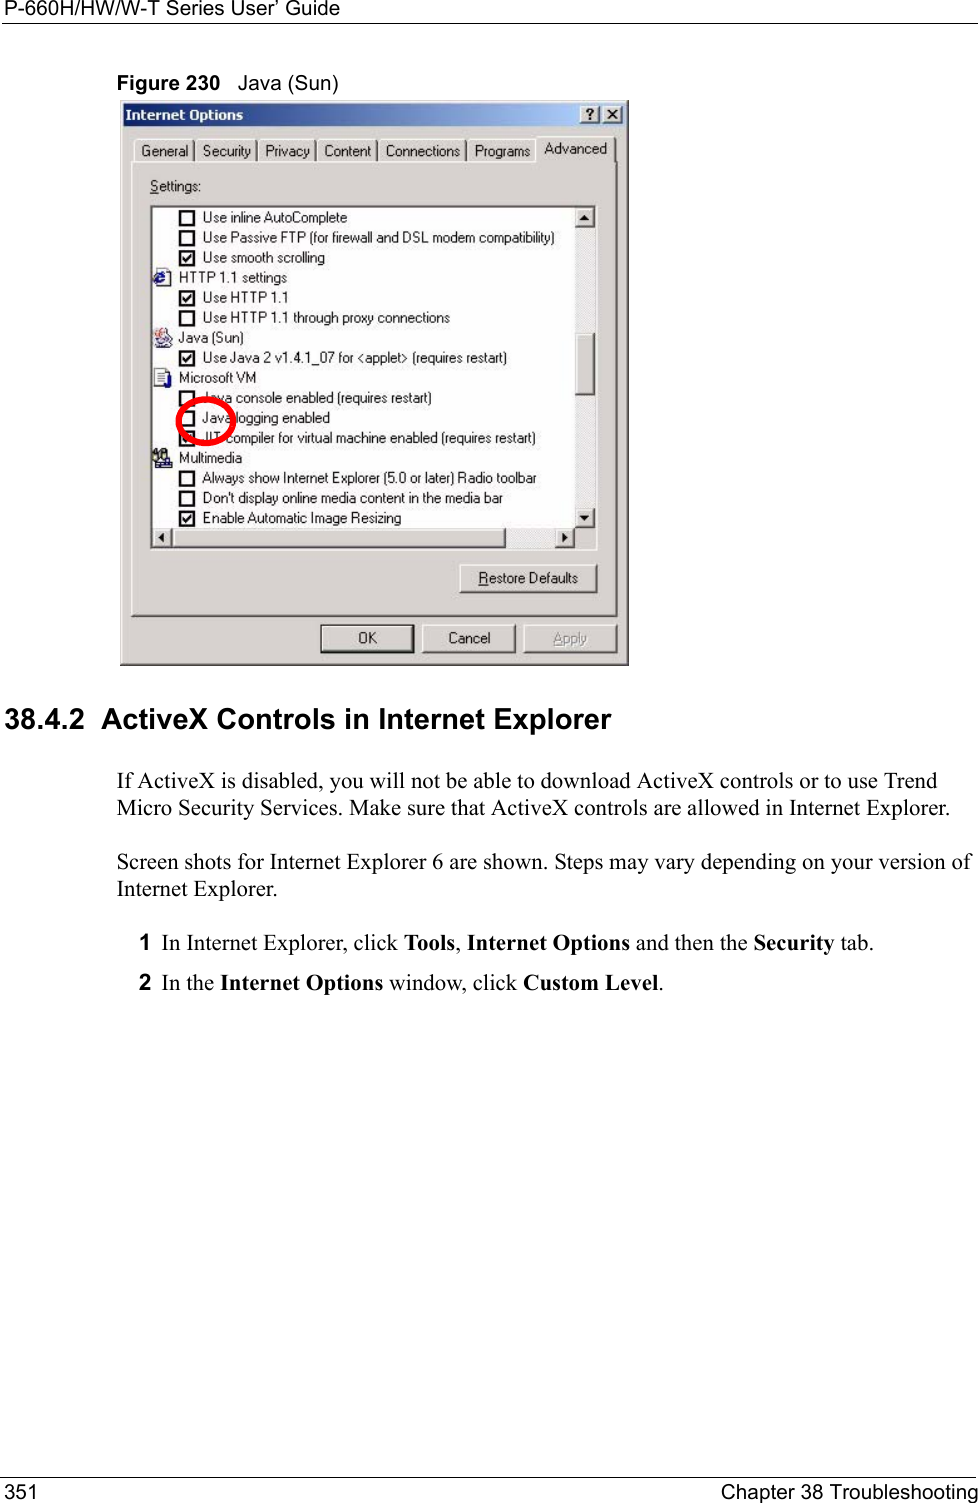 P-660H/HW/W-T Series User’ Guide351 Chapter 38 TroubleshootingFigure 230   Java (Sun)38.4.2  ActiveX Controls in Internet ExplorerIf ActiveX is disabled, you will not be able to download ActiveX controls or to use Trend Micro Security Services. Make sure that ActiveX controls are allowed in Internet Explorer. Screen shots for Internet Explorer 6 are shown. Steps may vary depending on your version of Internet Explorer. 1In Internet Explorer, click Tools, Internet Options and then the Security tab. 2In the Internet Options window, click Custom Level. 